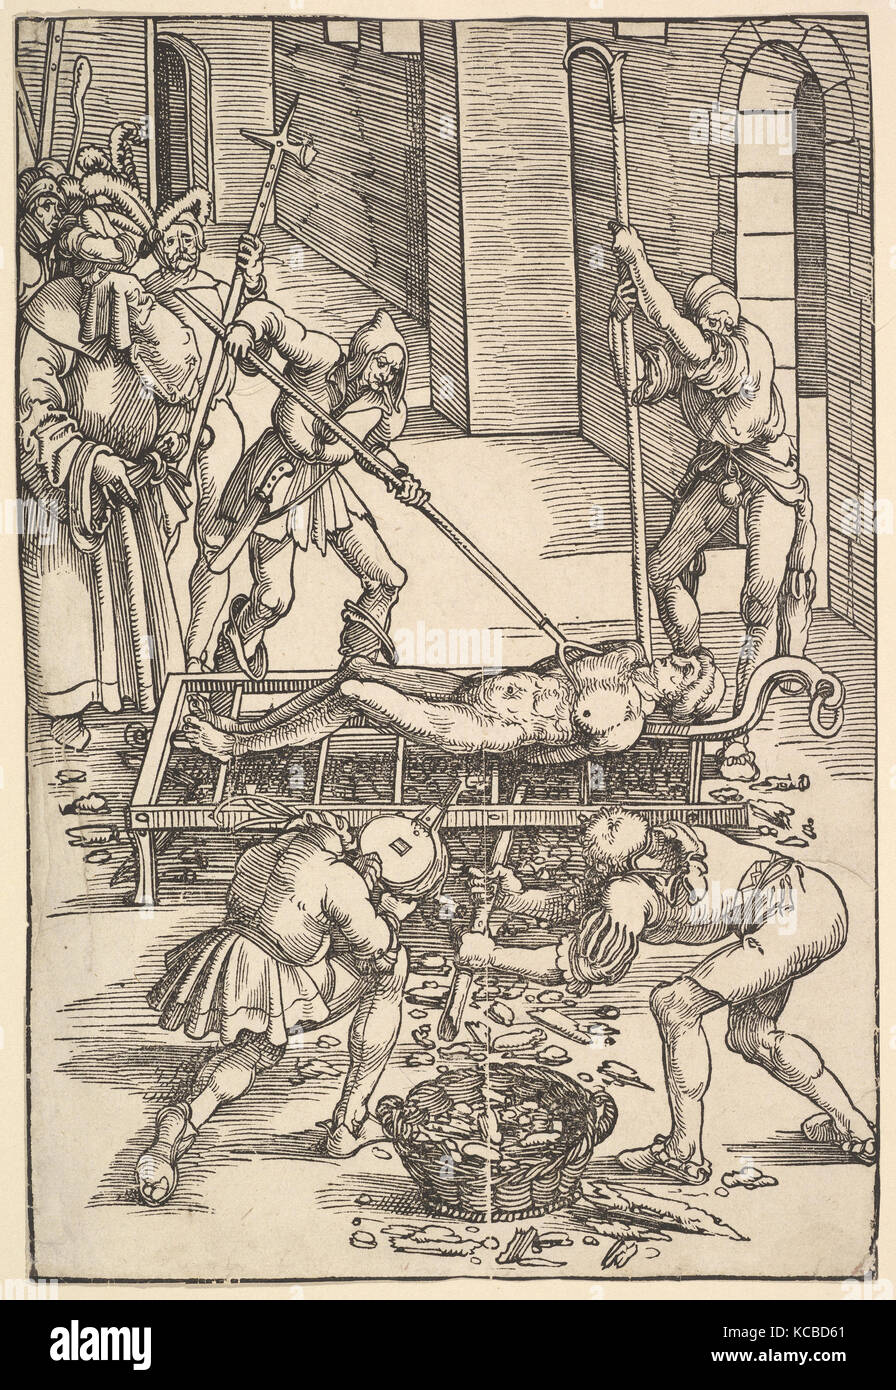 Martyrdom of St. Lawrence, ca. 1505, Woodcut, sheet: 8 15/16 x 13 3/16 in. (22.7 x 33.5 cm), Prints, Hans Baldung Stock Photo